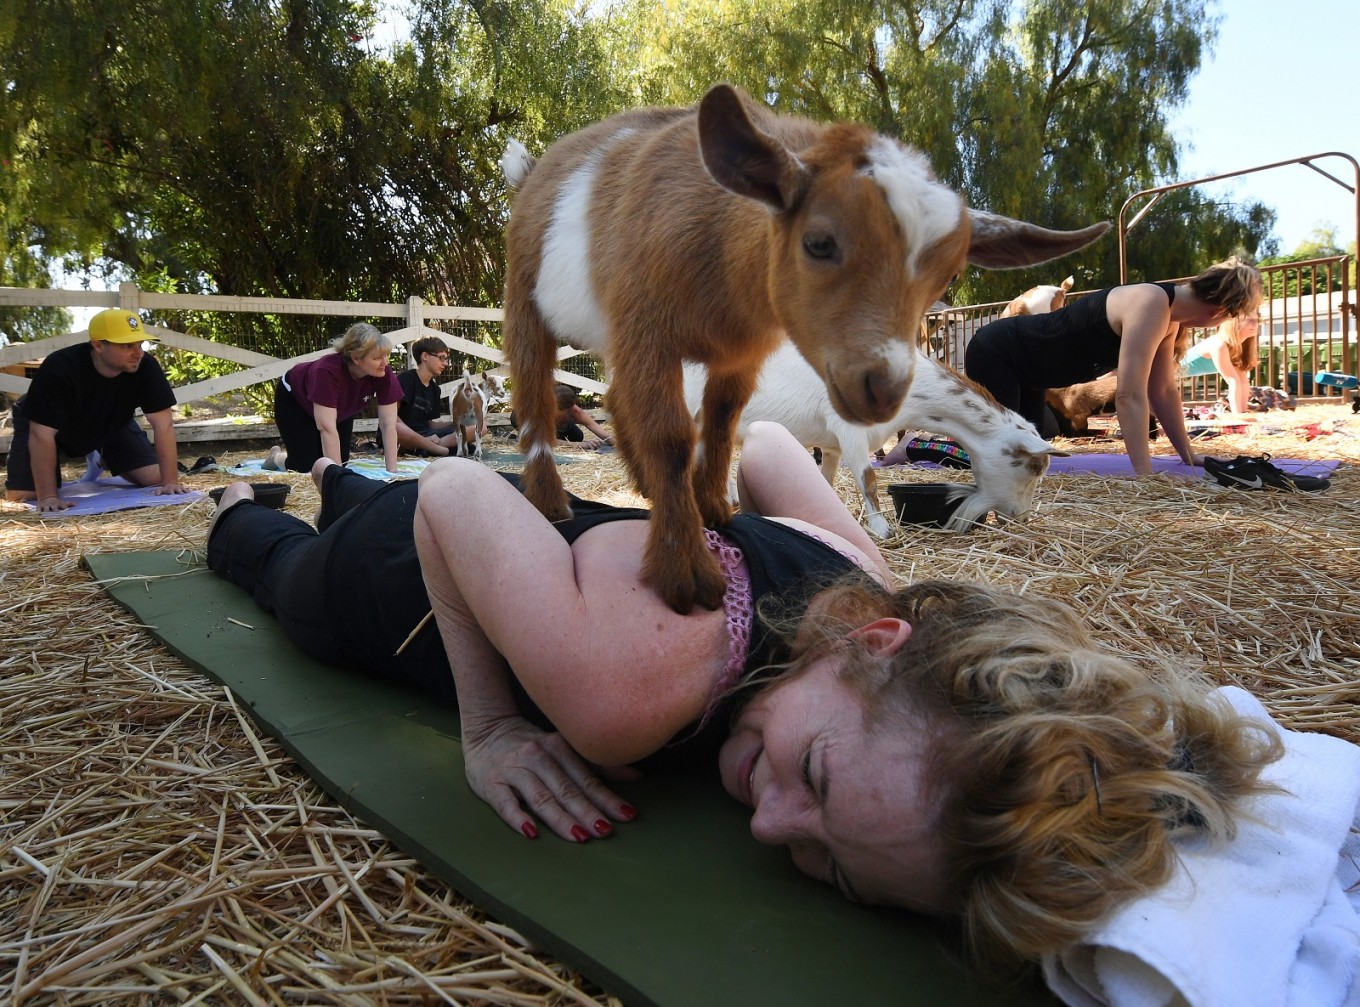 Yoga with goats craze takes off in US - Health - The Jakarta Post